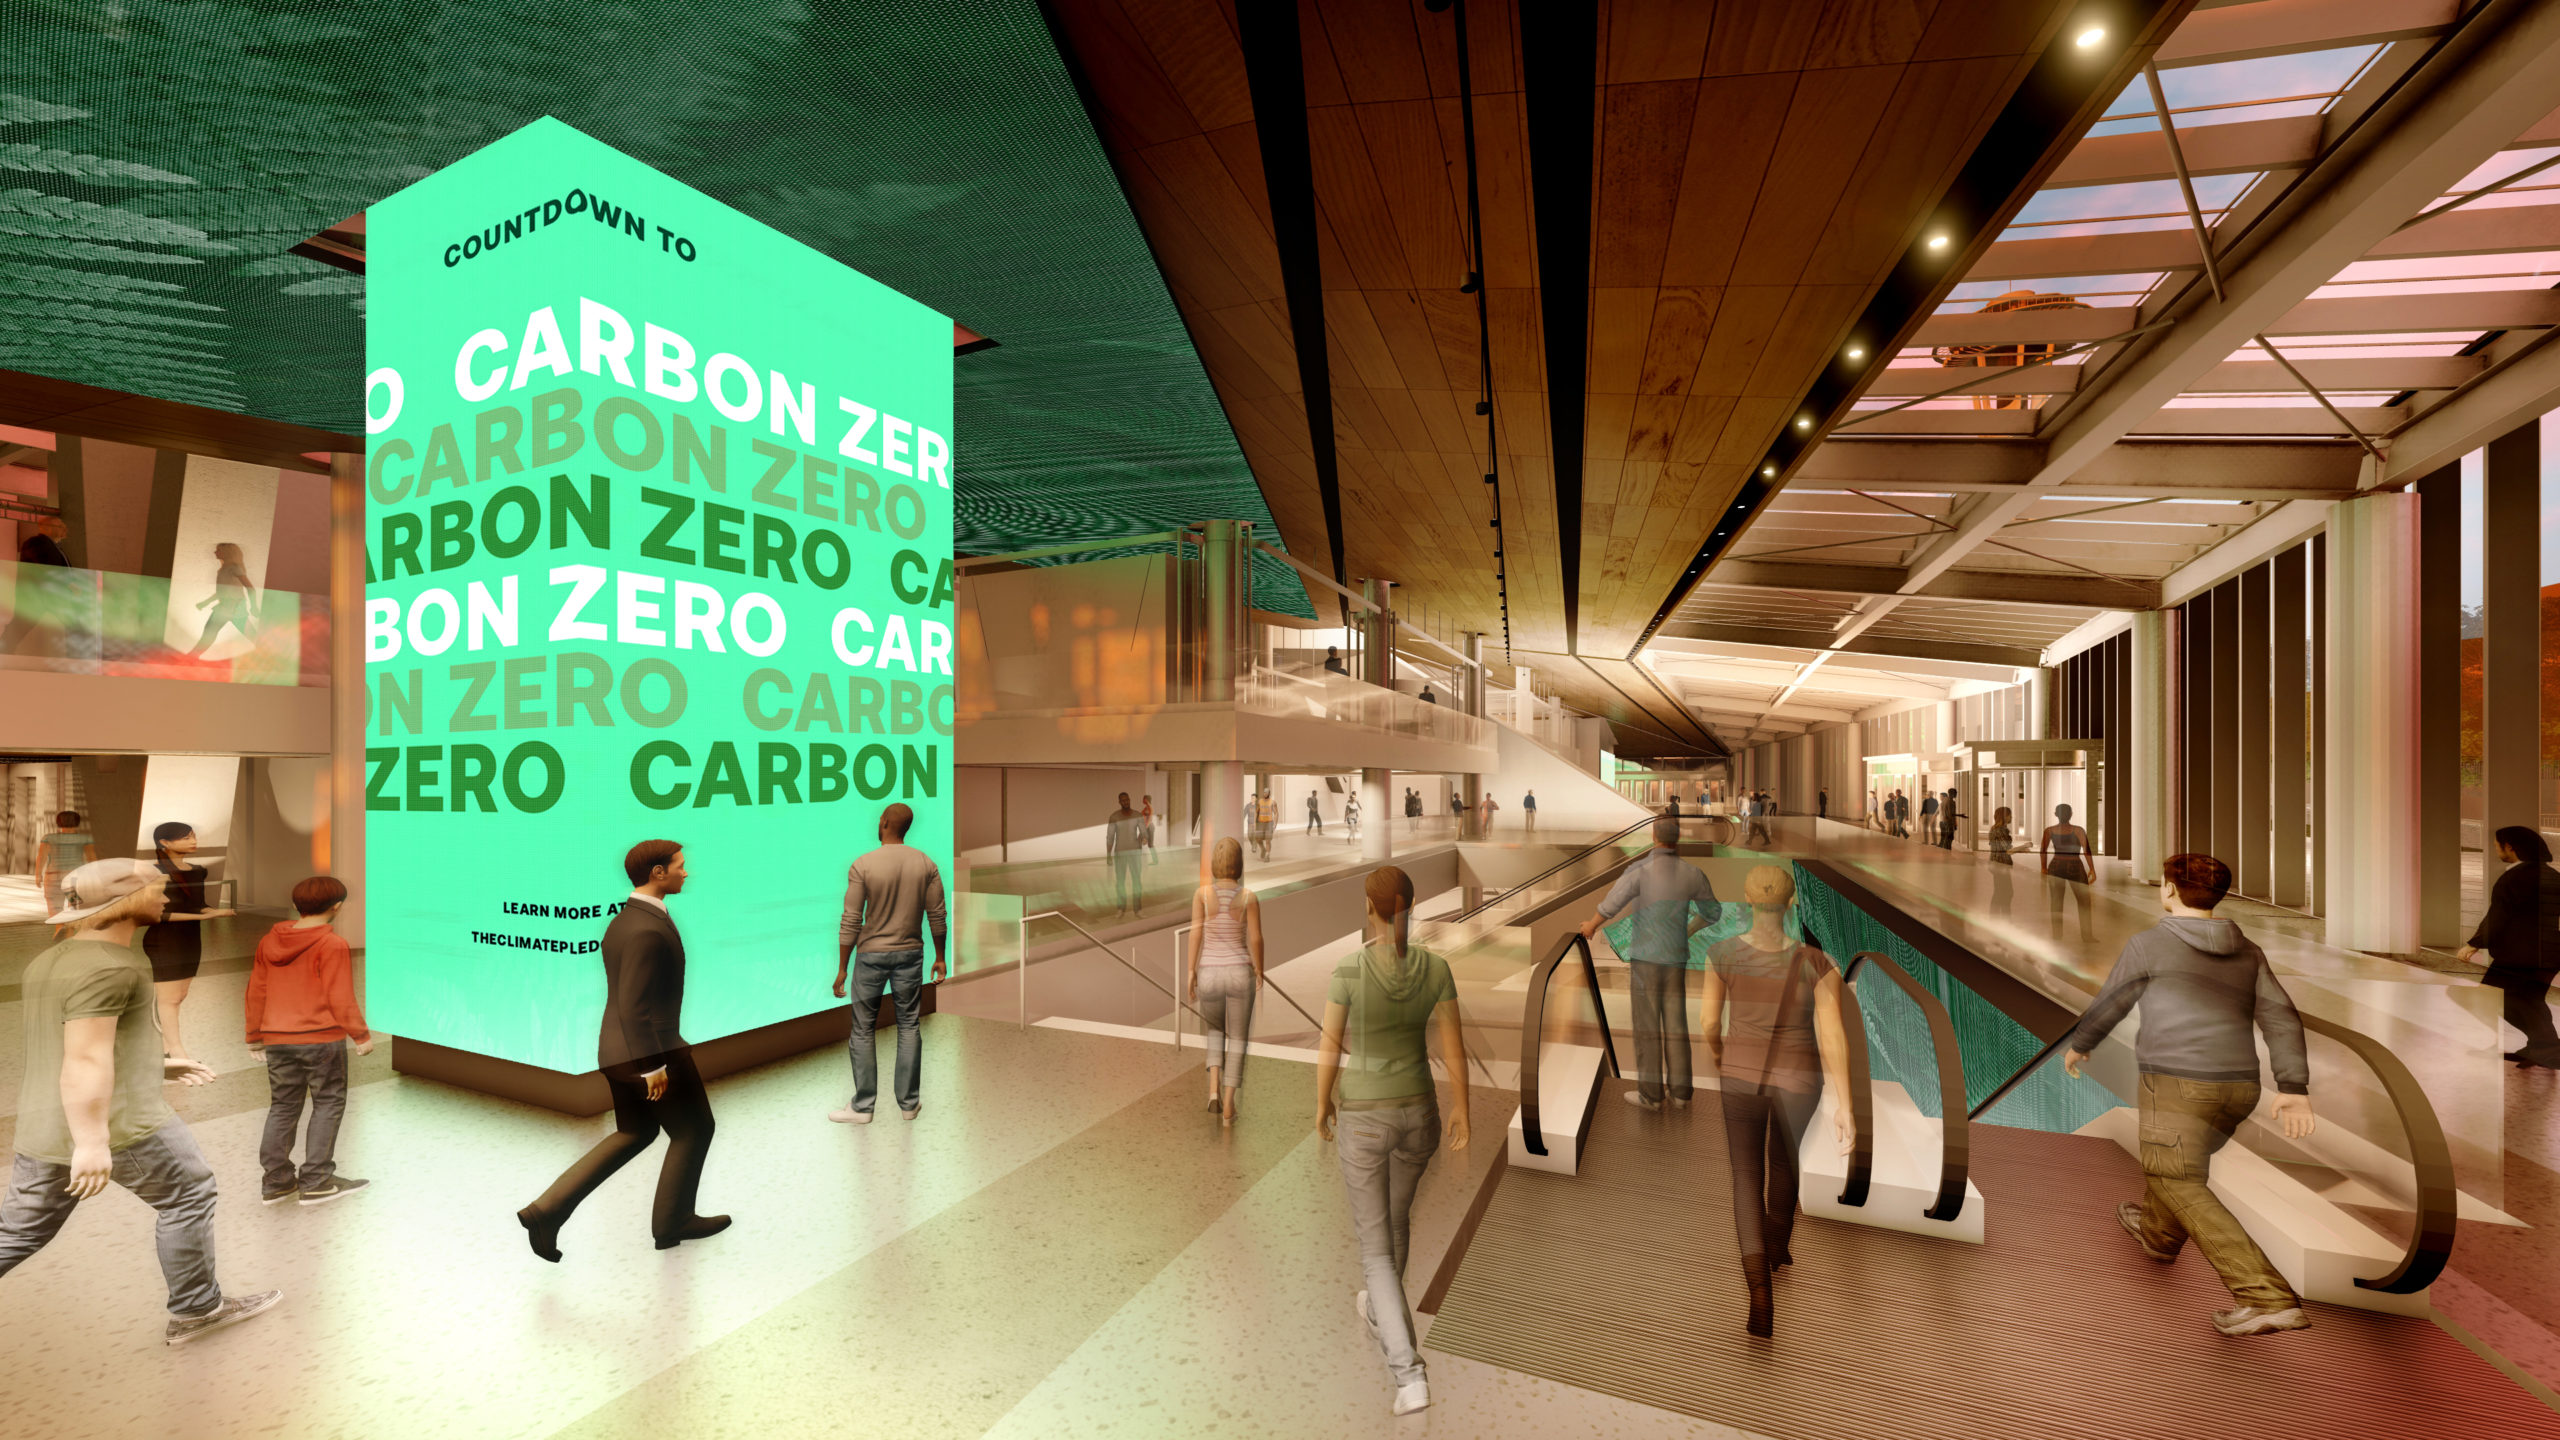 The Climate Pledge Arena is Set to be the First Net-Zero Certified